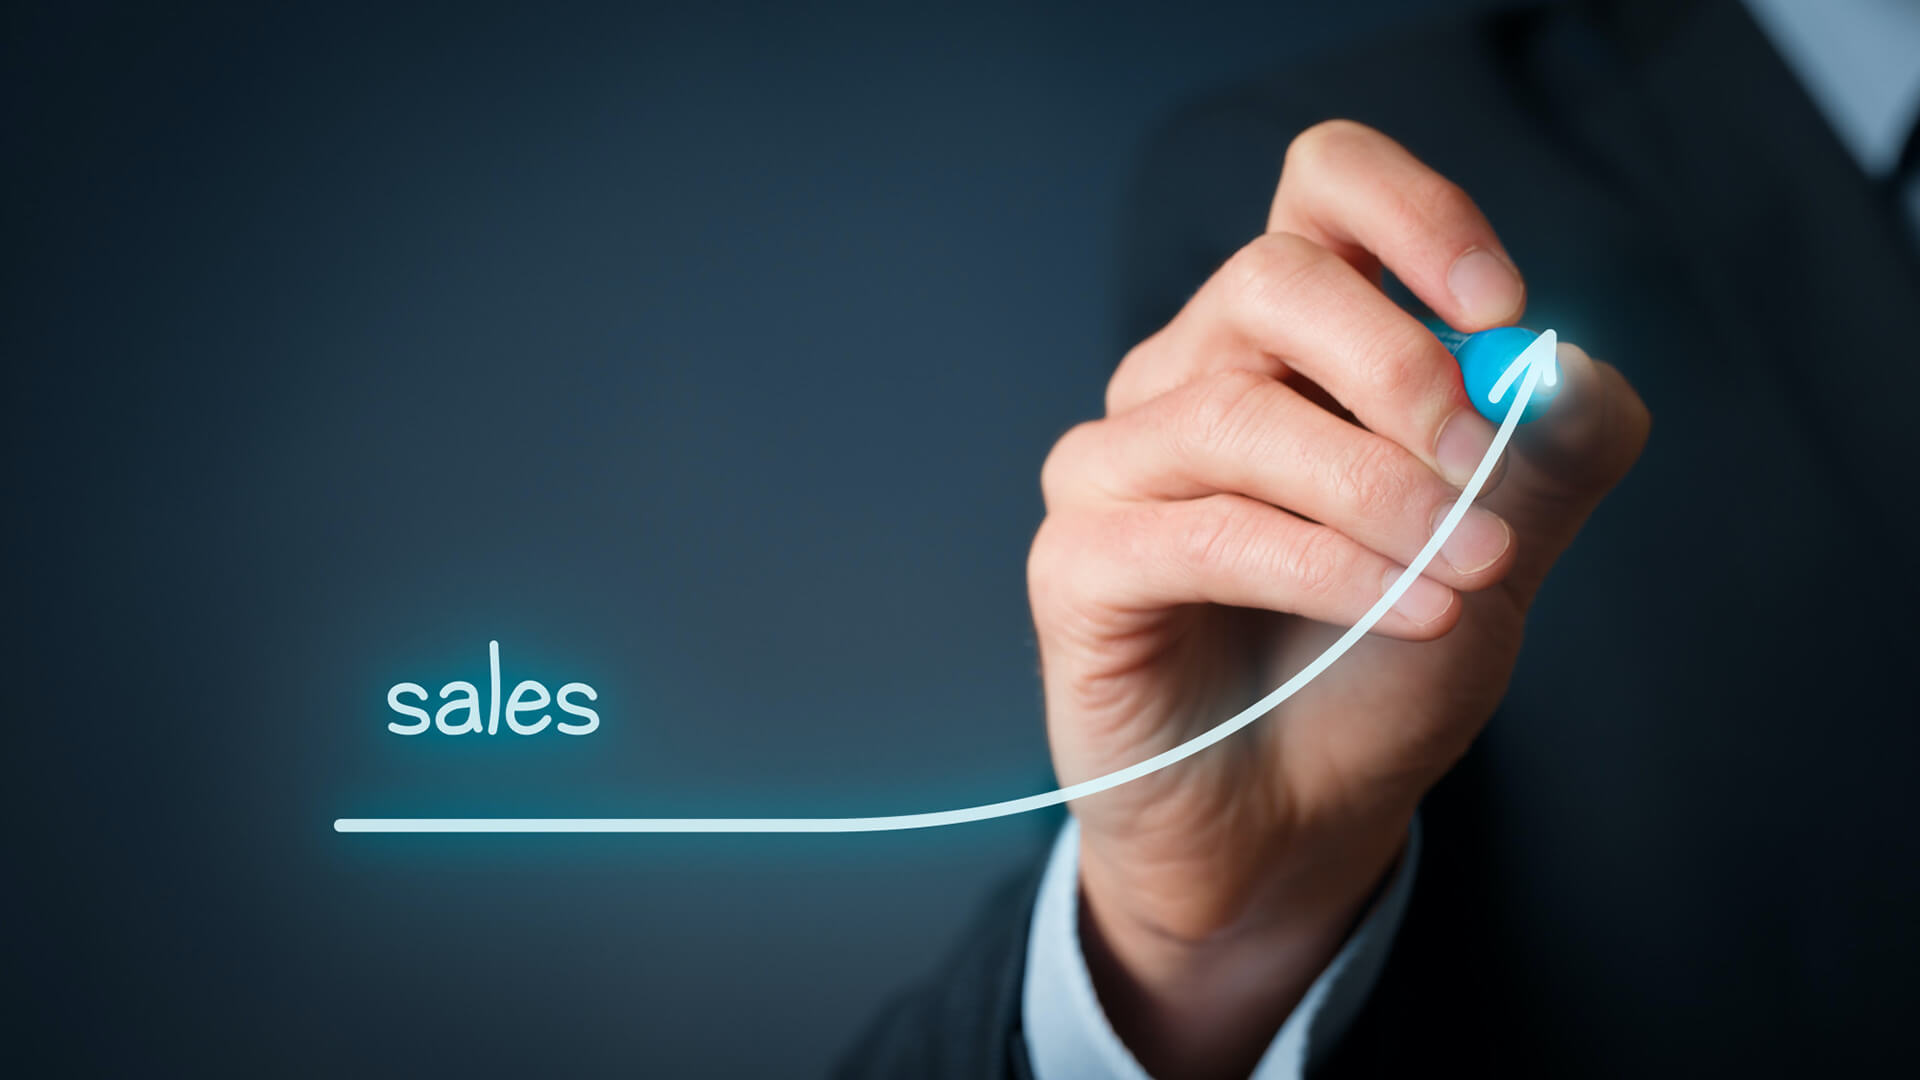 improve your sales process with dynamics 365 for sales